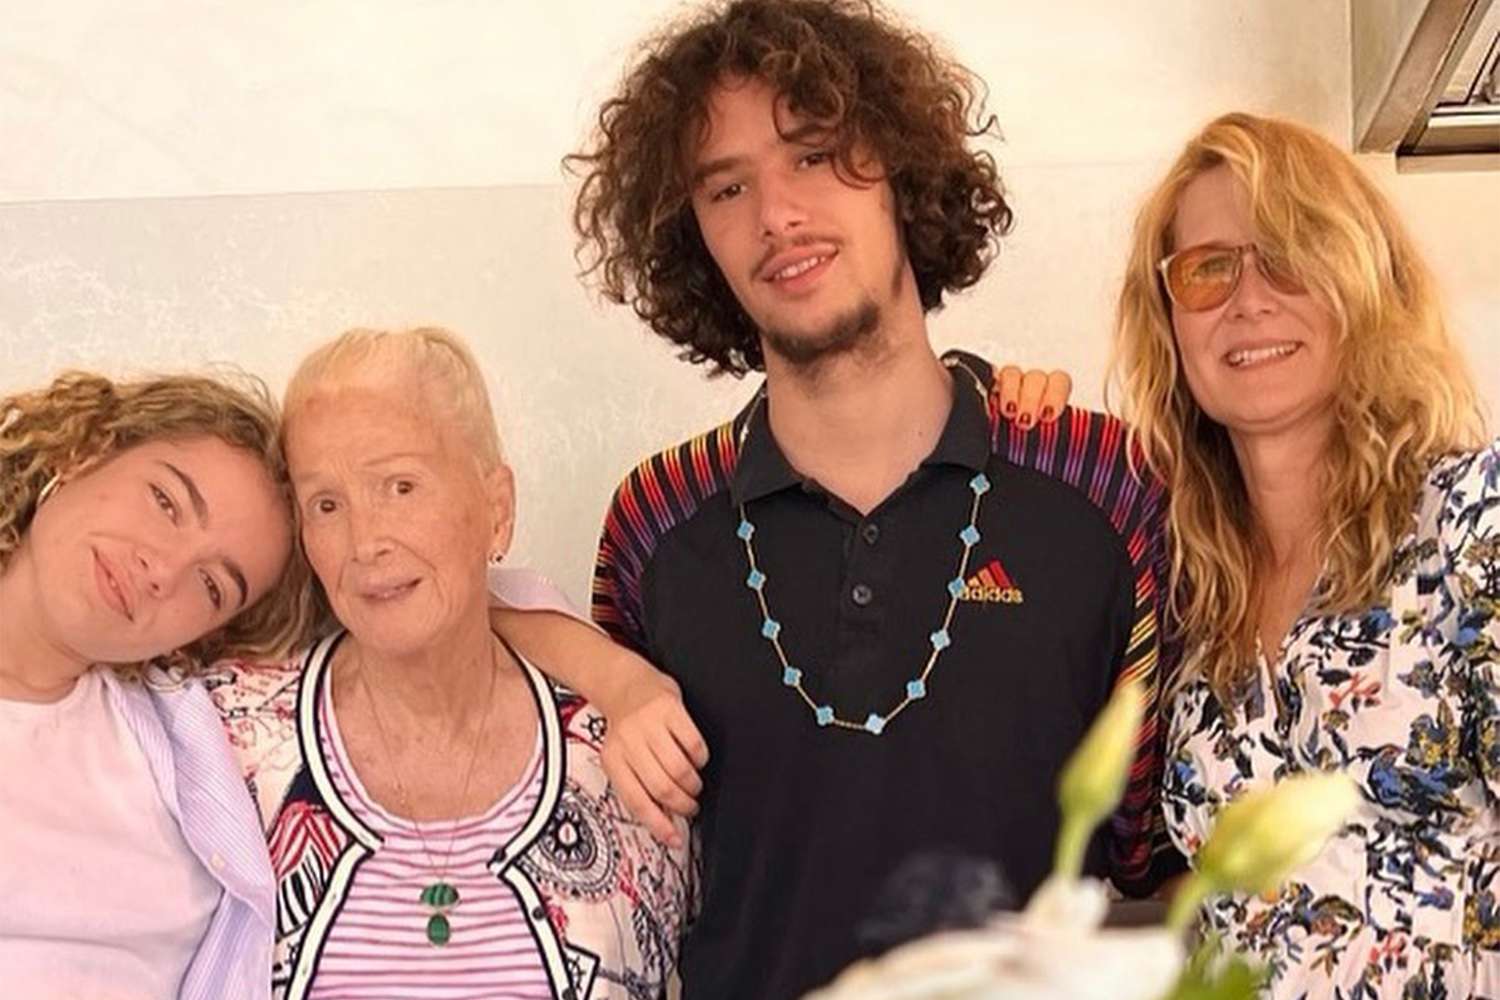 https://www.instagram.com/p/ChiY9XpPhD6/ lauradern Verified Greatest gift I could have ever dreamt up. Happiest 21st birthday to you my amazing son/friend/inspiration. You teach me every day…about art..empathy..and grace. You are a profound human and artist. And you are such a kind and amazing man. I’m so blessed and lucky to love you and learn from you. And you make me laugh every day. 3d